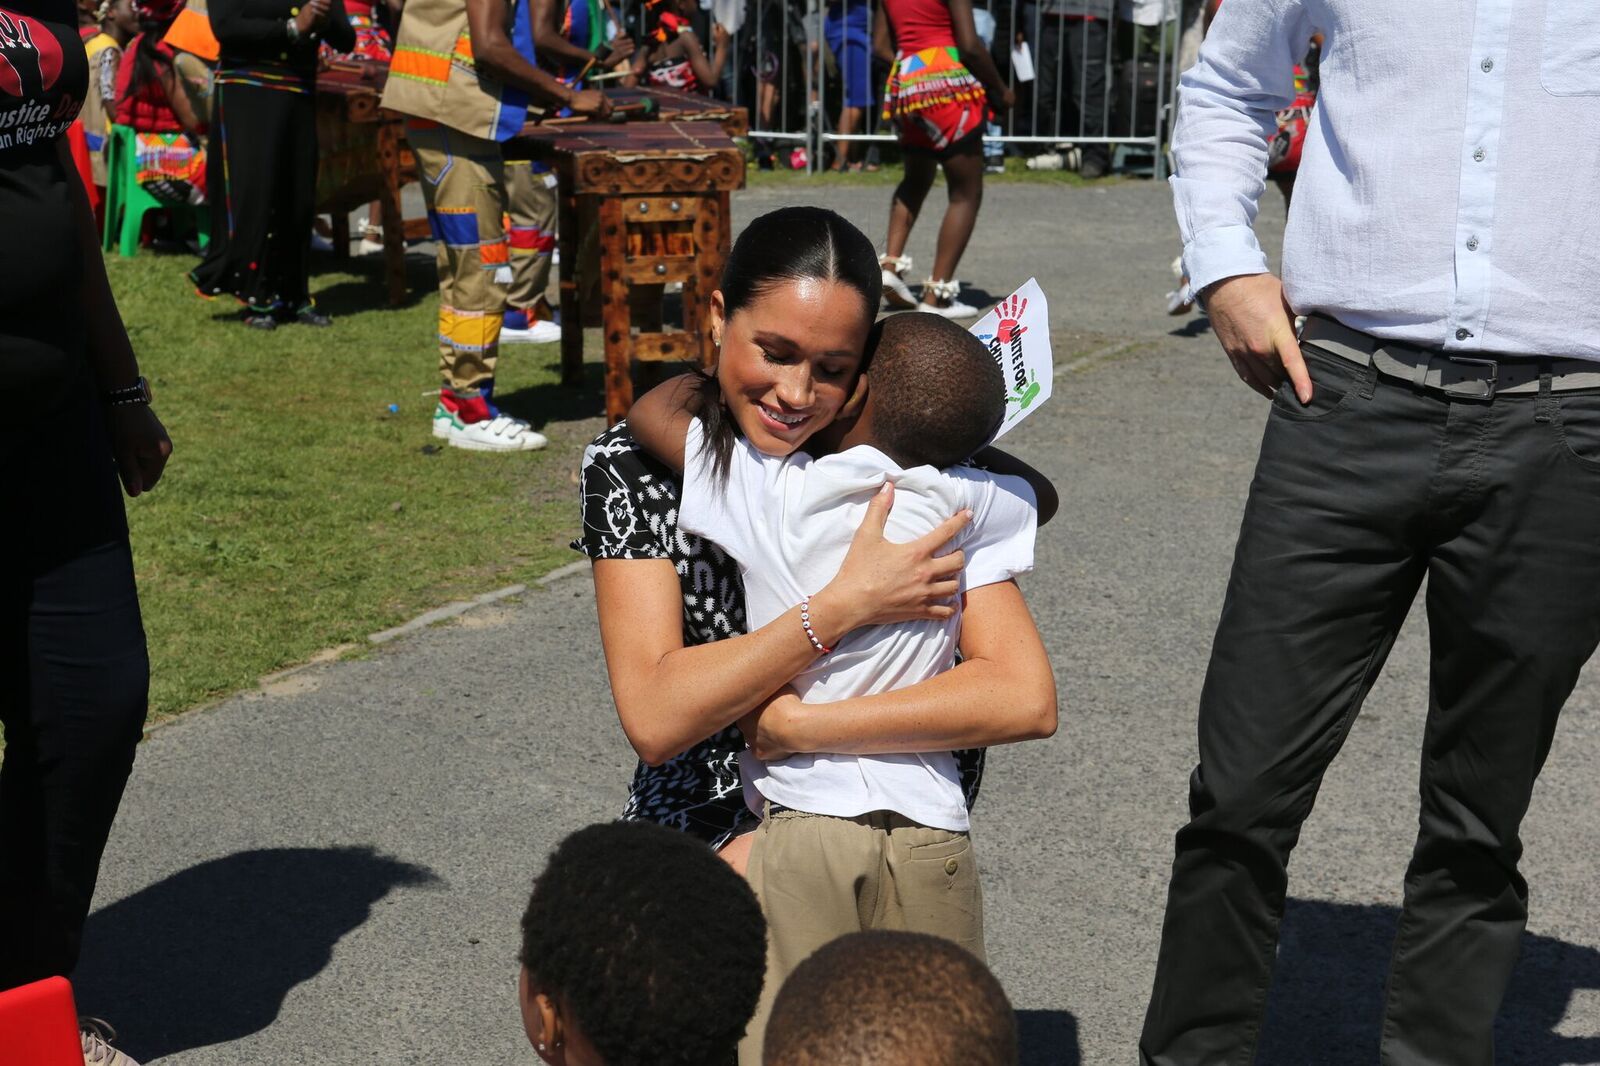 Meghan Markle hugging a child that welcomed her to South Africa | Source: Getty Images/GlobalImagesUkraine